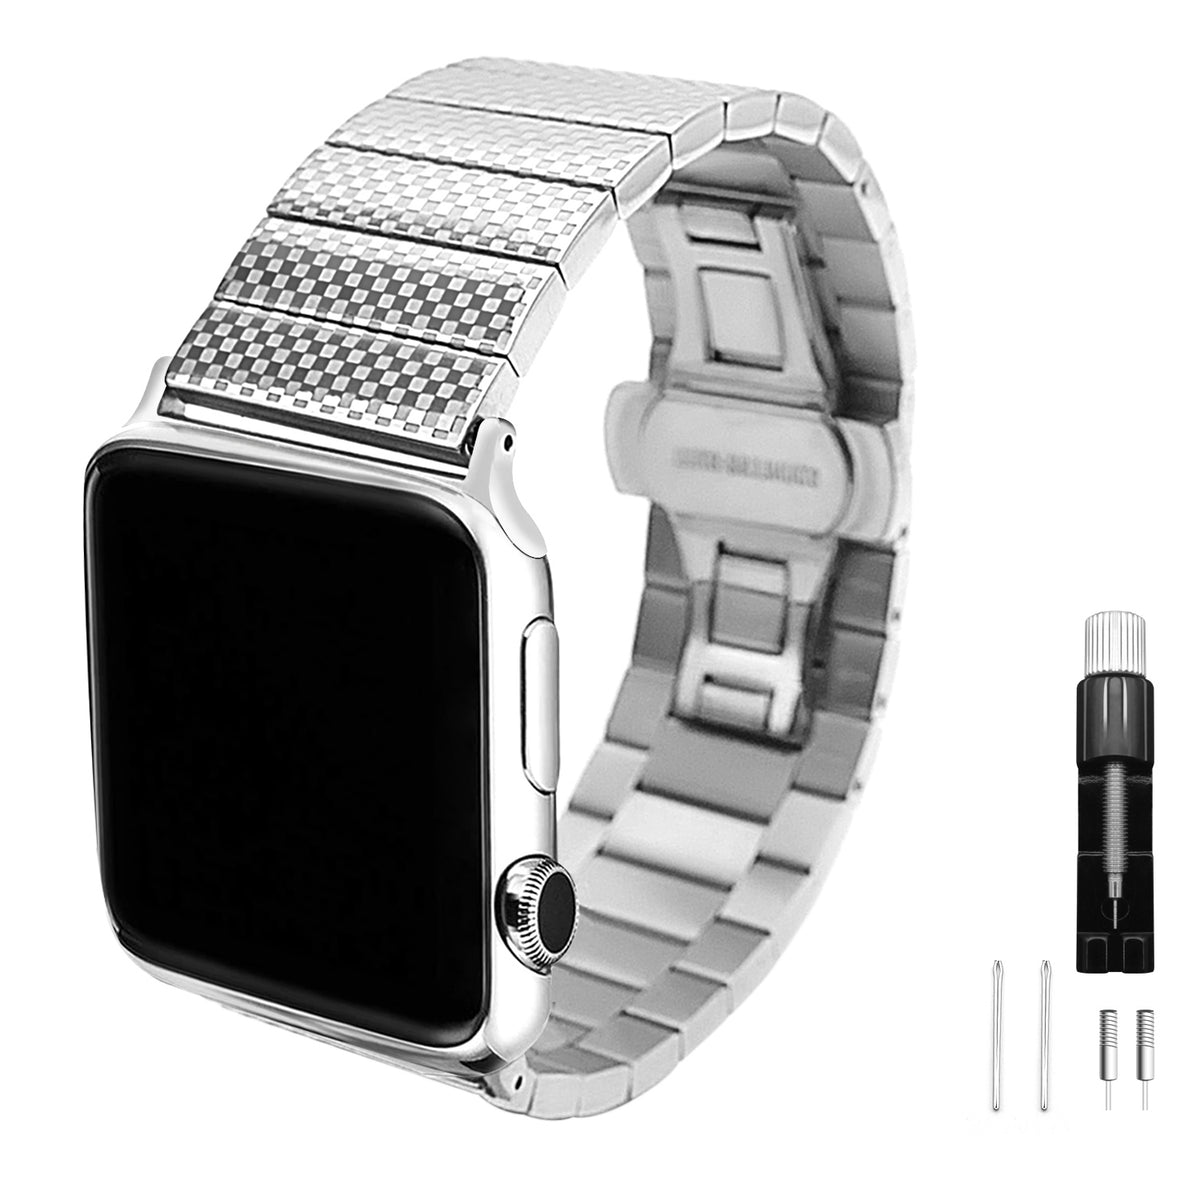 apply to Apple Watch sport strap stainless steel replacement strap bracelet adjustable wrist strap compatible with IWatch series 1 2 3 4